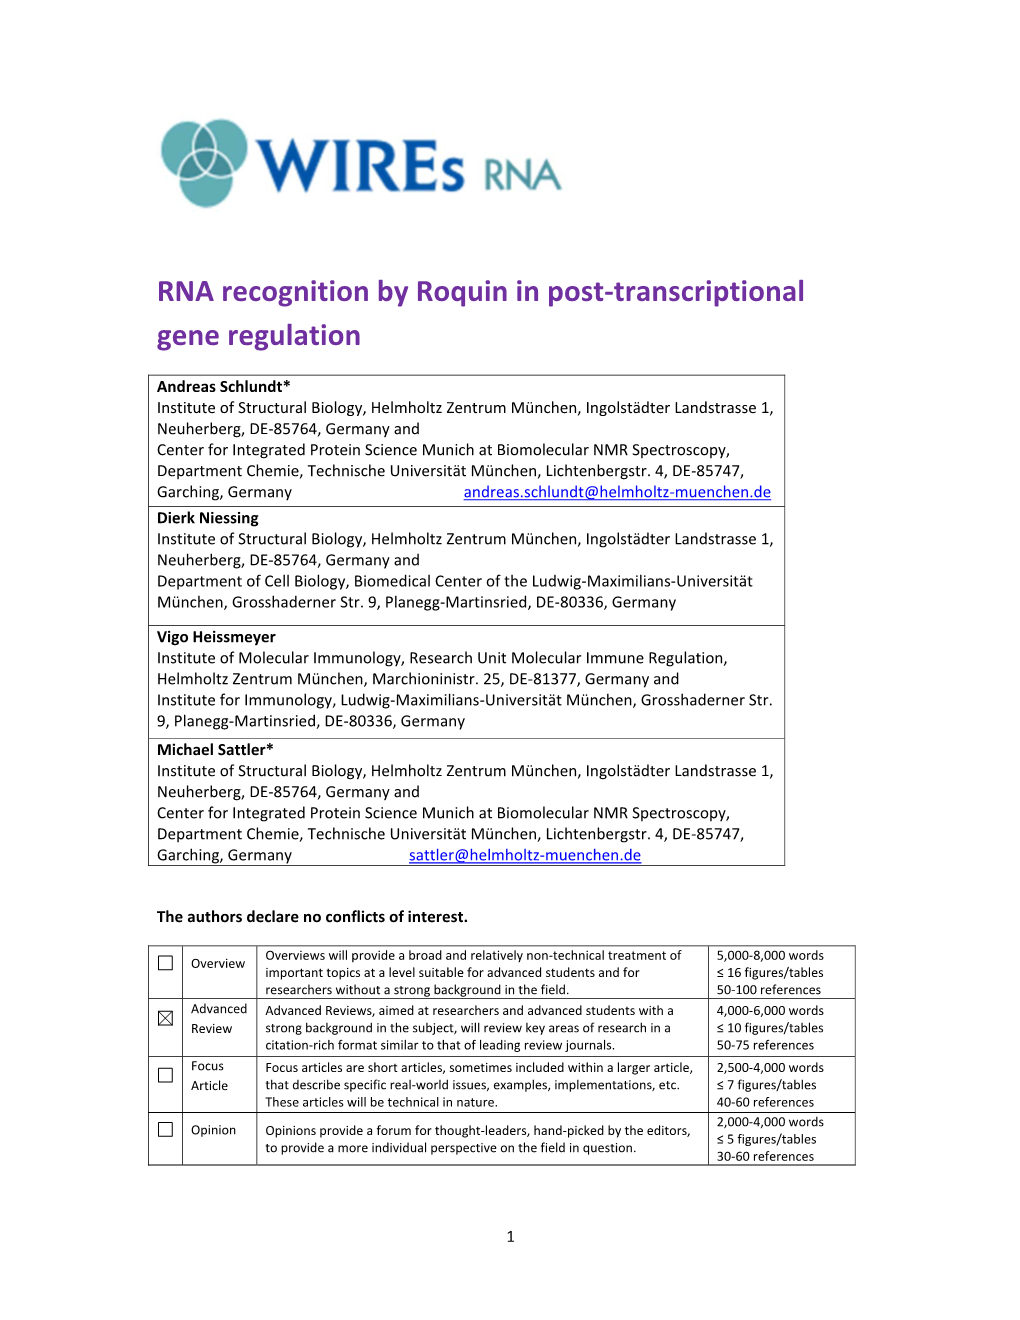 RNA Recognition by Roquin in Post-Transcriptional Gene Regulation